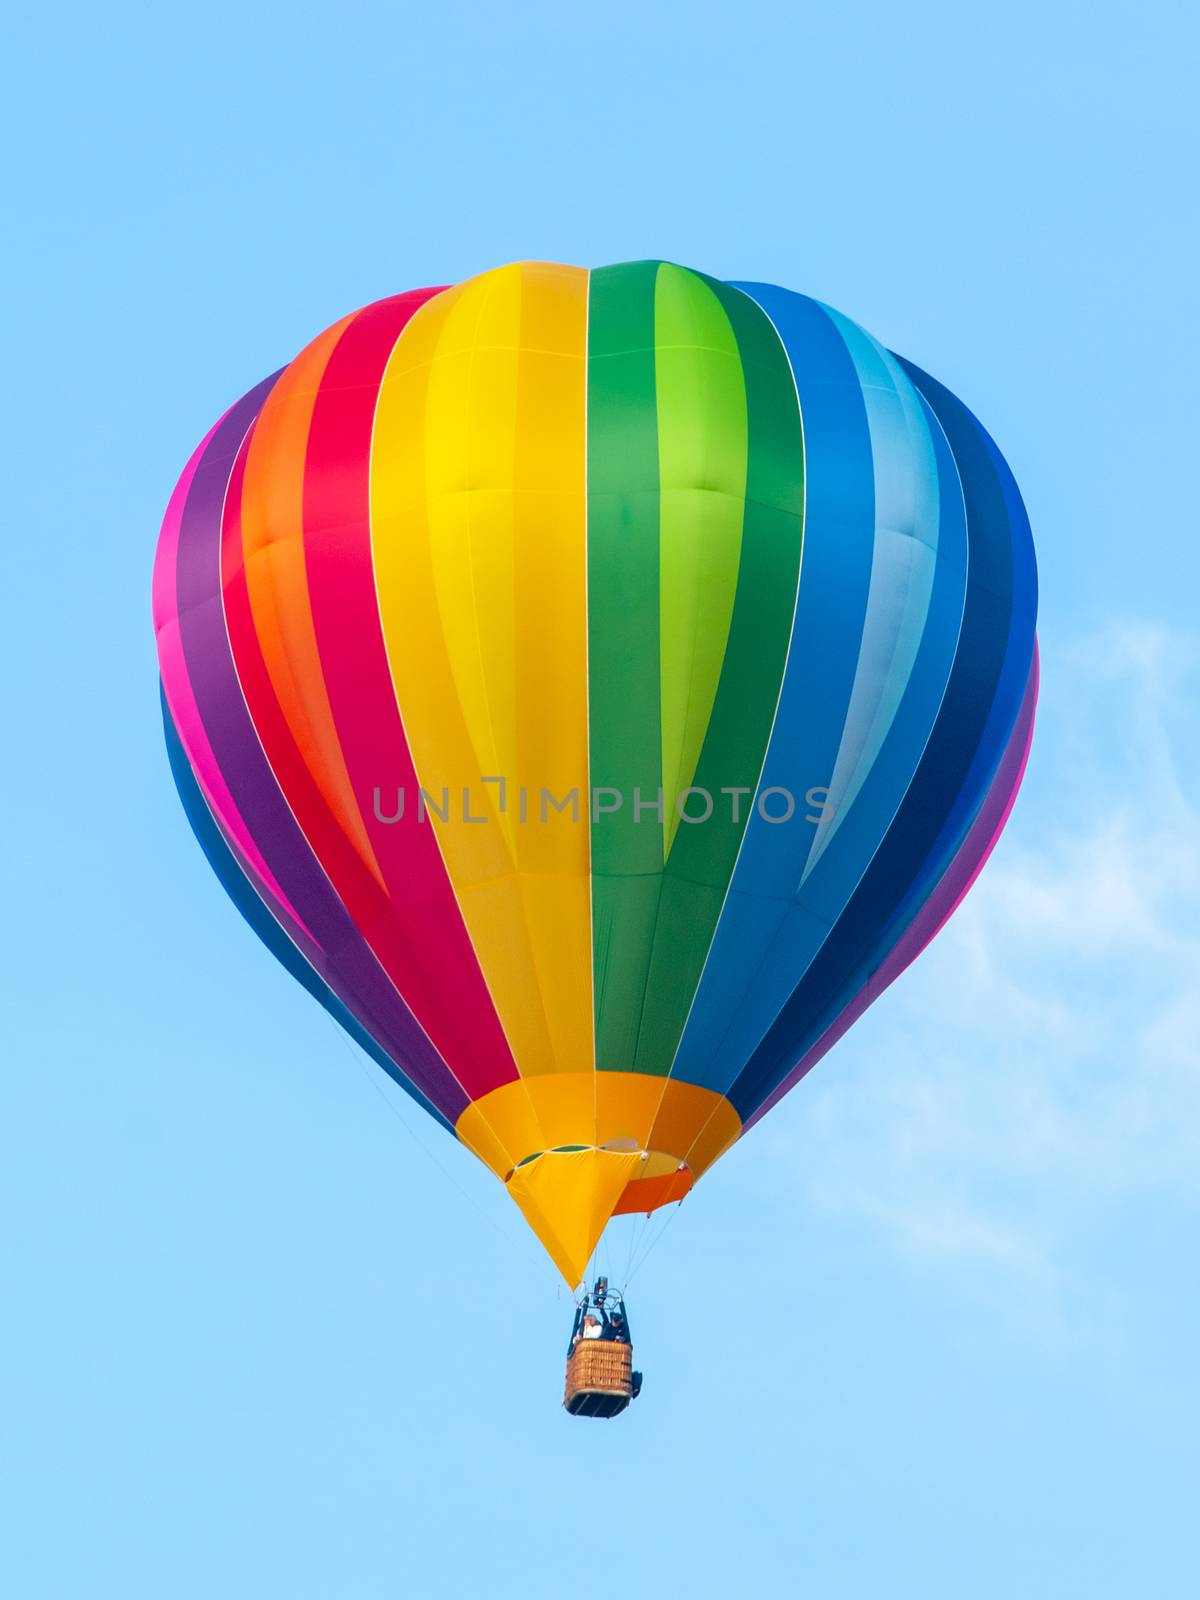 Hot air balloon in rainbow spectrum colors on blue sky background.